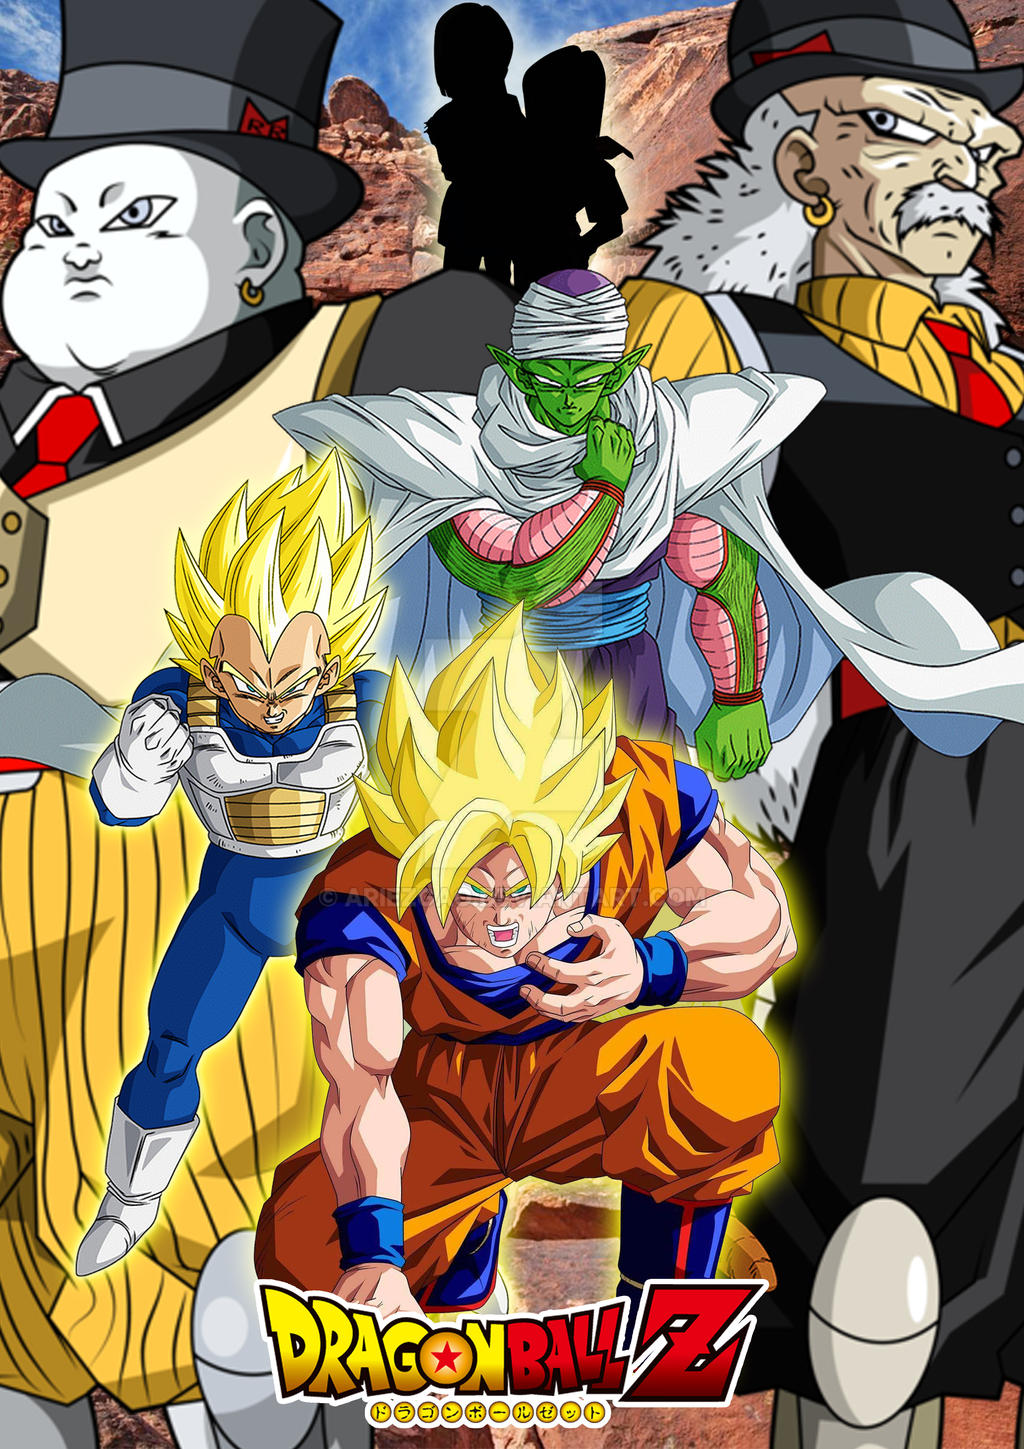 Dragonball Legends - Android 19 and 20 for XPS by o-DV89-o on DeviantArt